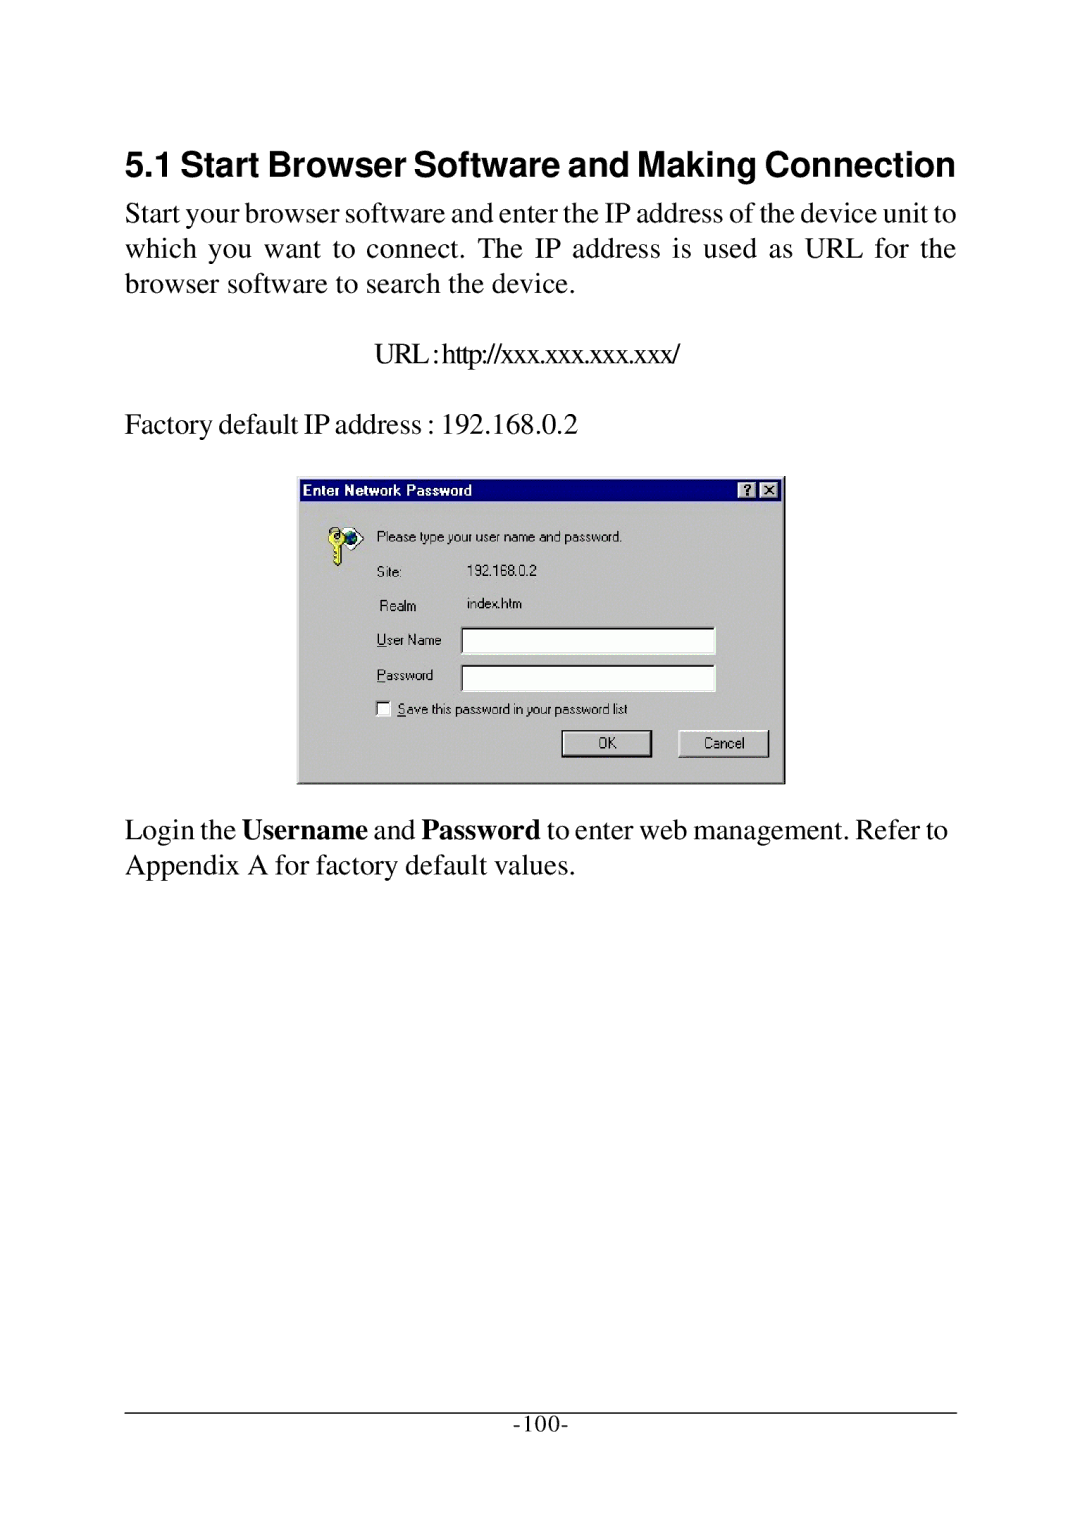 KTI Networks KS-2260 operation manual Start Browser Software and Making Connection 